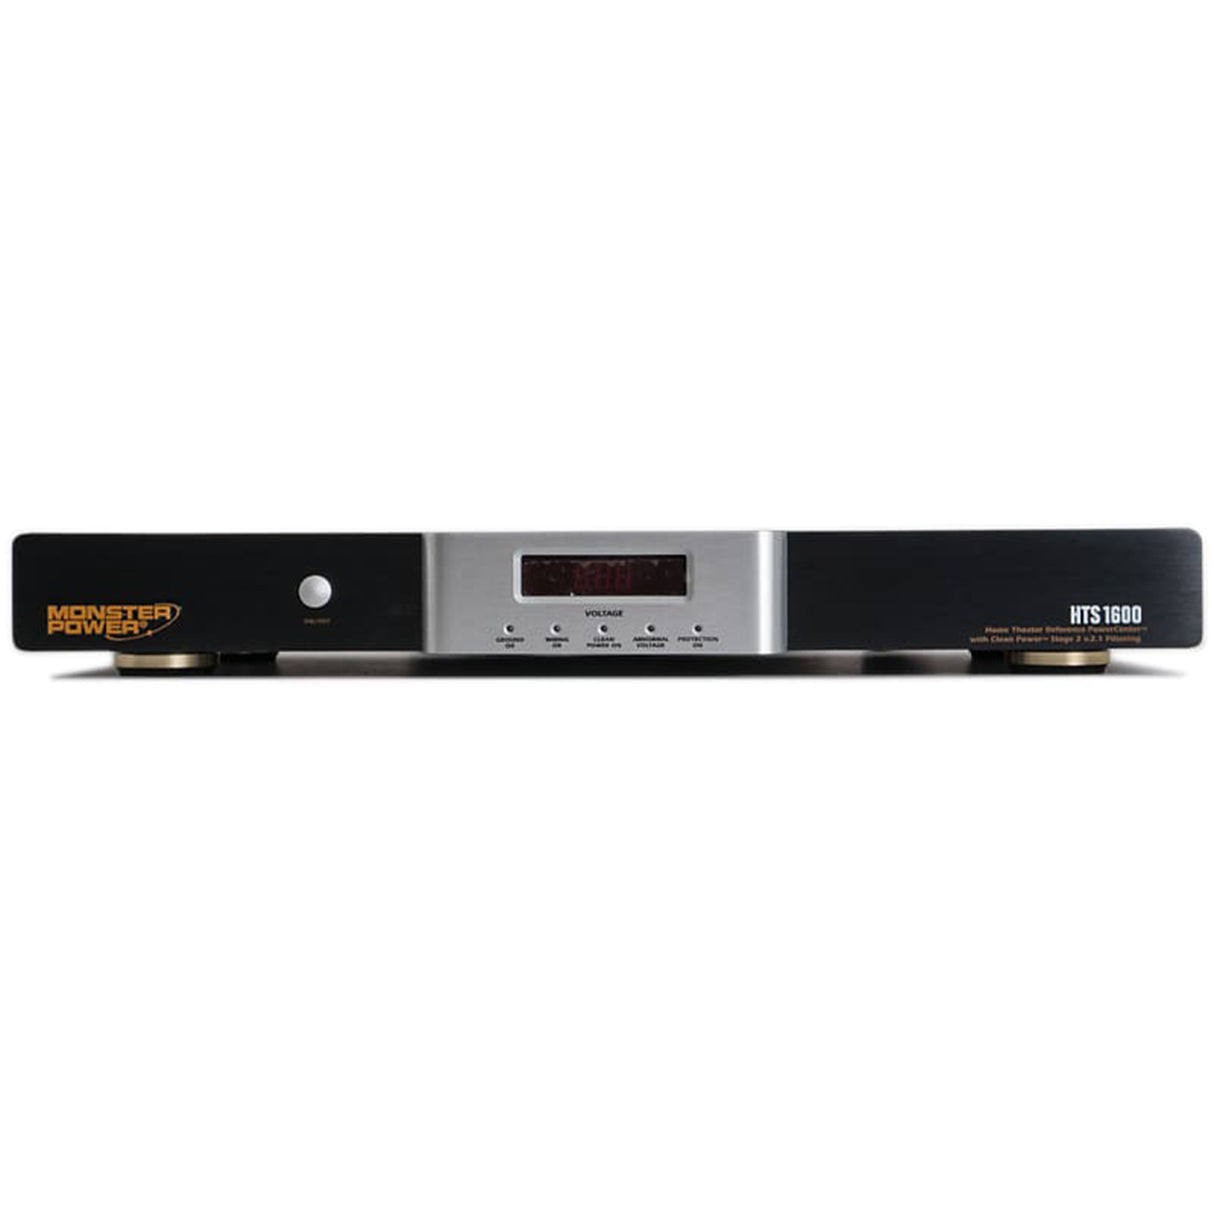 Monster HTS 1600I MKII - Home Theatre Reference Power Center